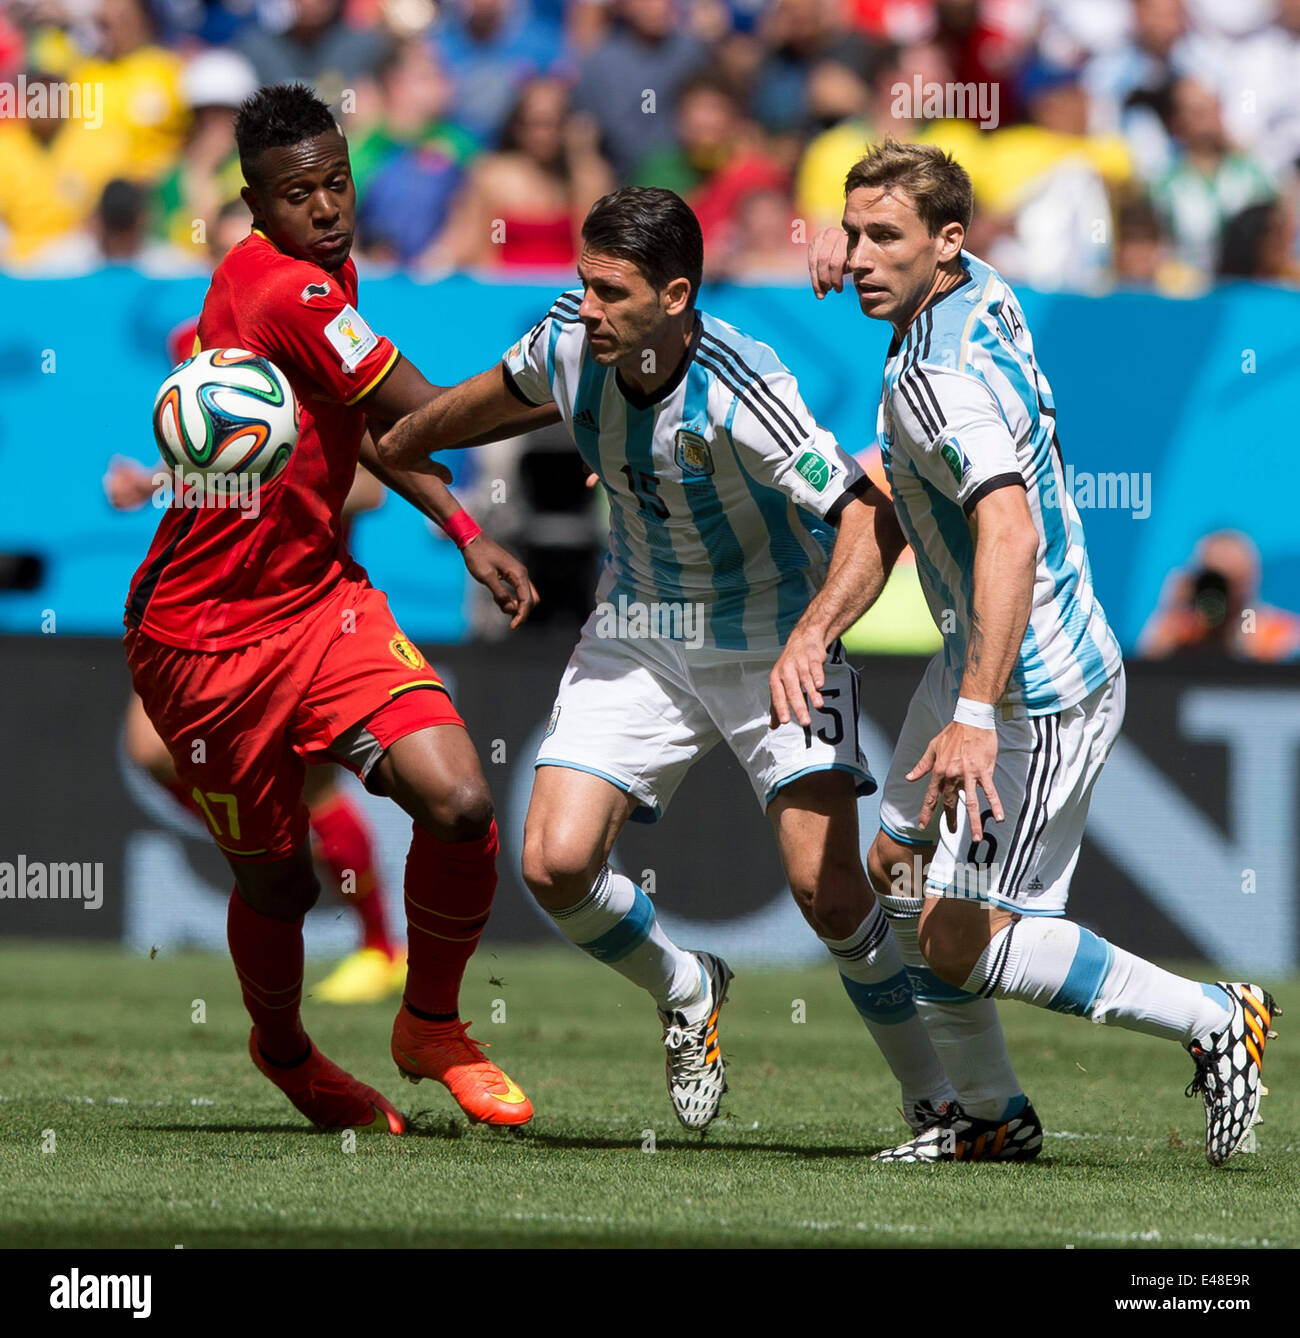 Brasilia, Brazil. 5th July, 2014. Argentina's Martin Demichelis (C) vies with Belgium's Divock Origi (L) during a quarter-finals match between Argentina and Belgium of 2014 FIFA World Cup at the Estadio Nacional Stadium in Brasilia, Brazil, on July 5, 2014. Argentina won 1-0 over Belgium and qualified for the semi-finals. Credit:  Qi Heng/Xinhua/Alamy Live News Stock Photo